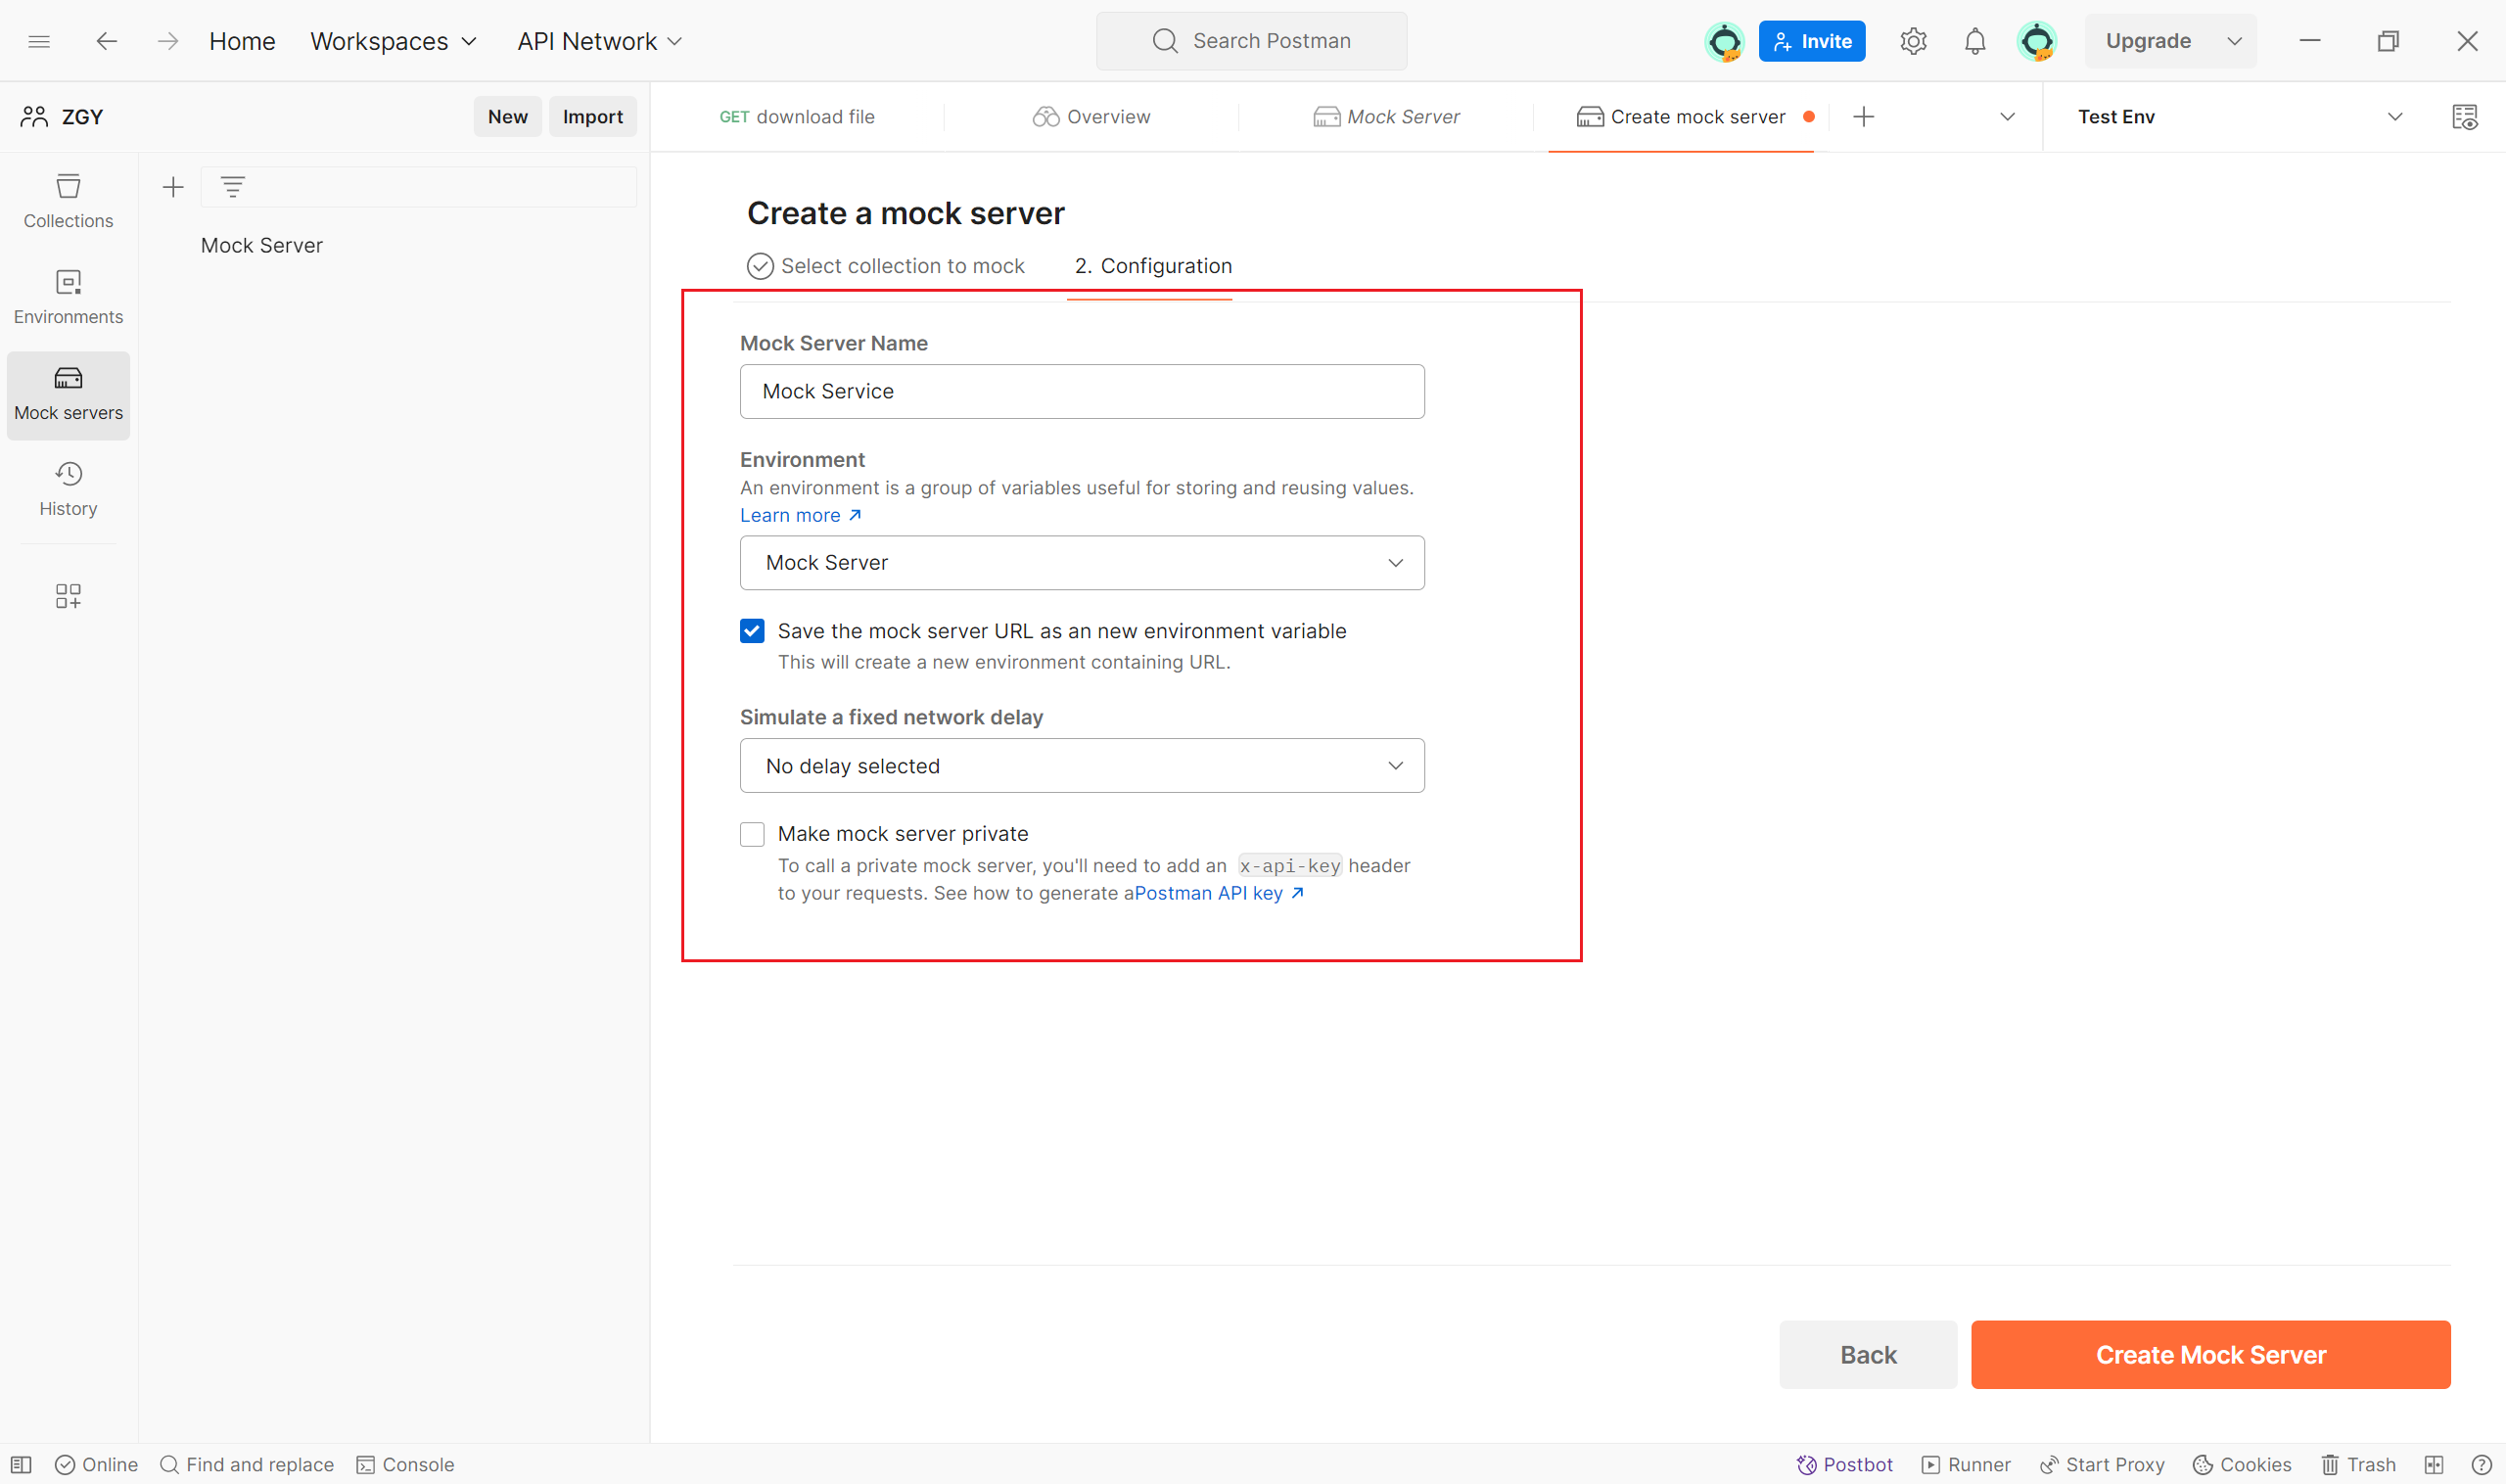 enable and utilize the Mock server in Postman